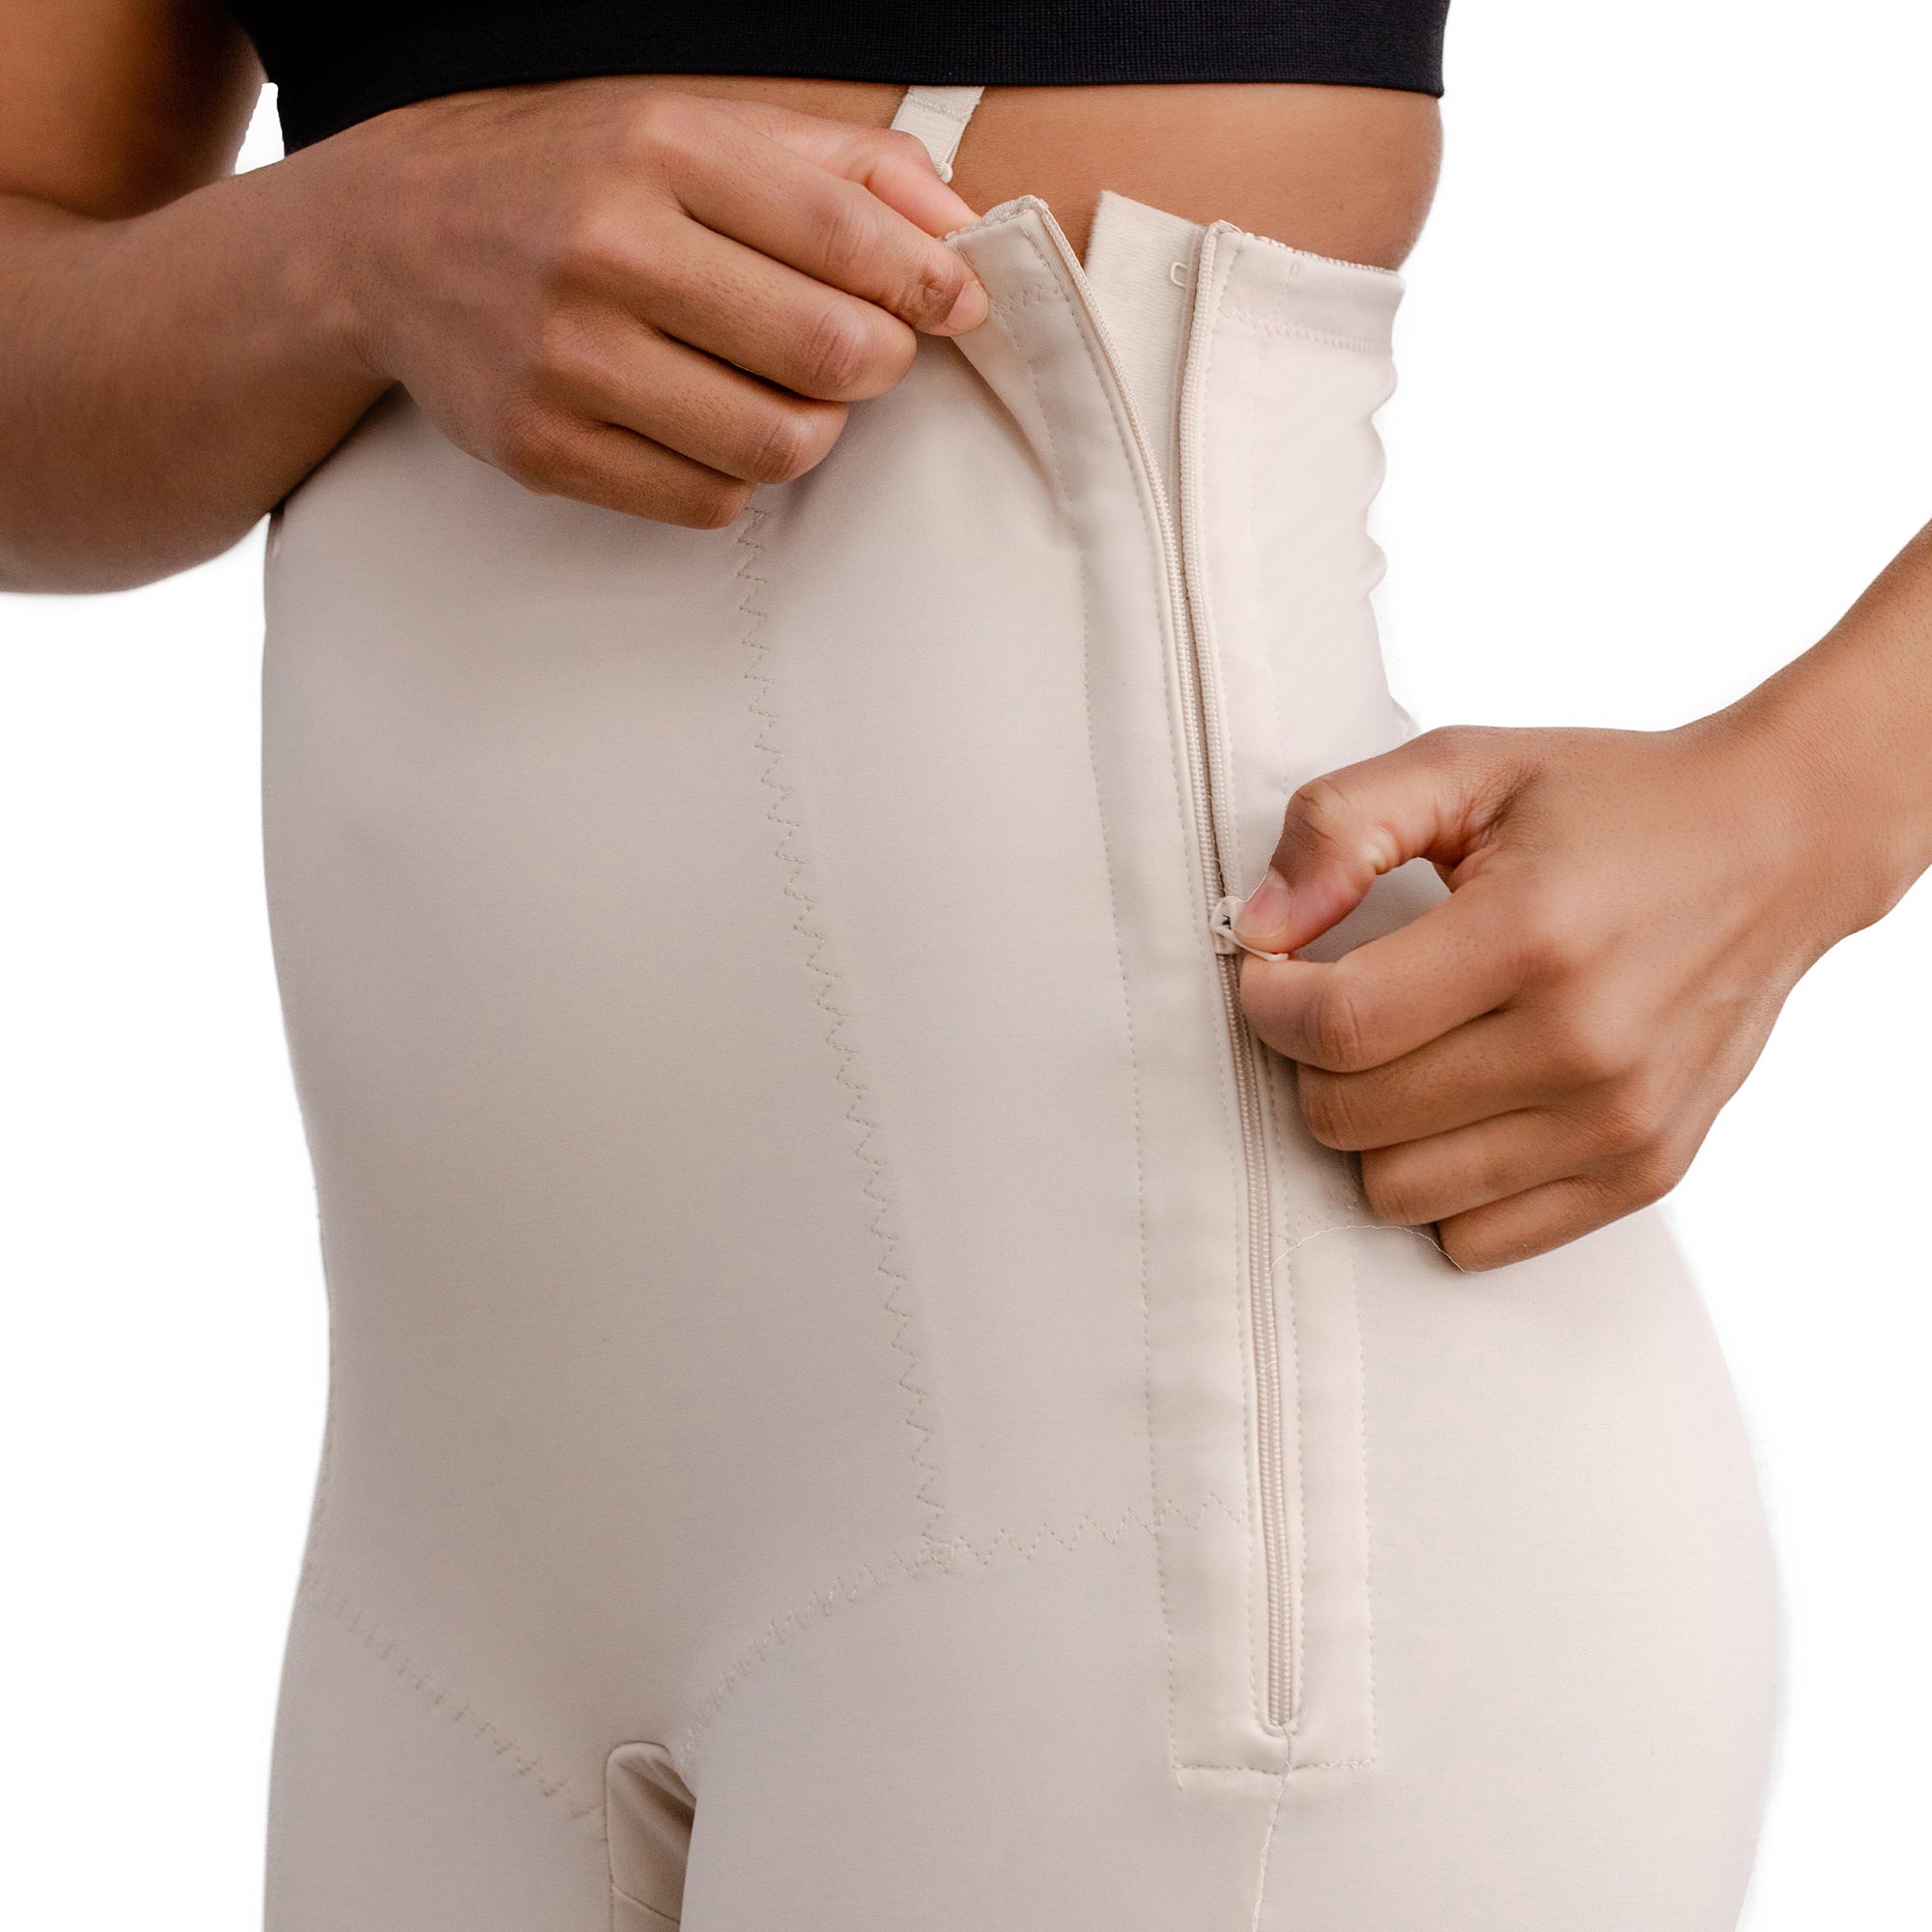 Motif Medical Postpartum Recovery Garment for C-Section and Natural Birth